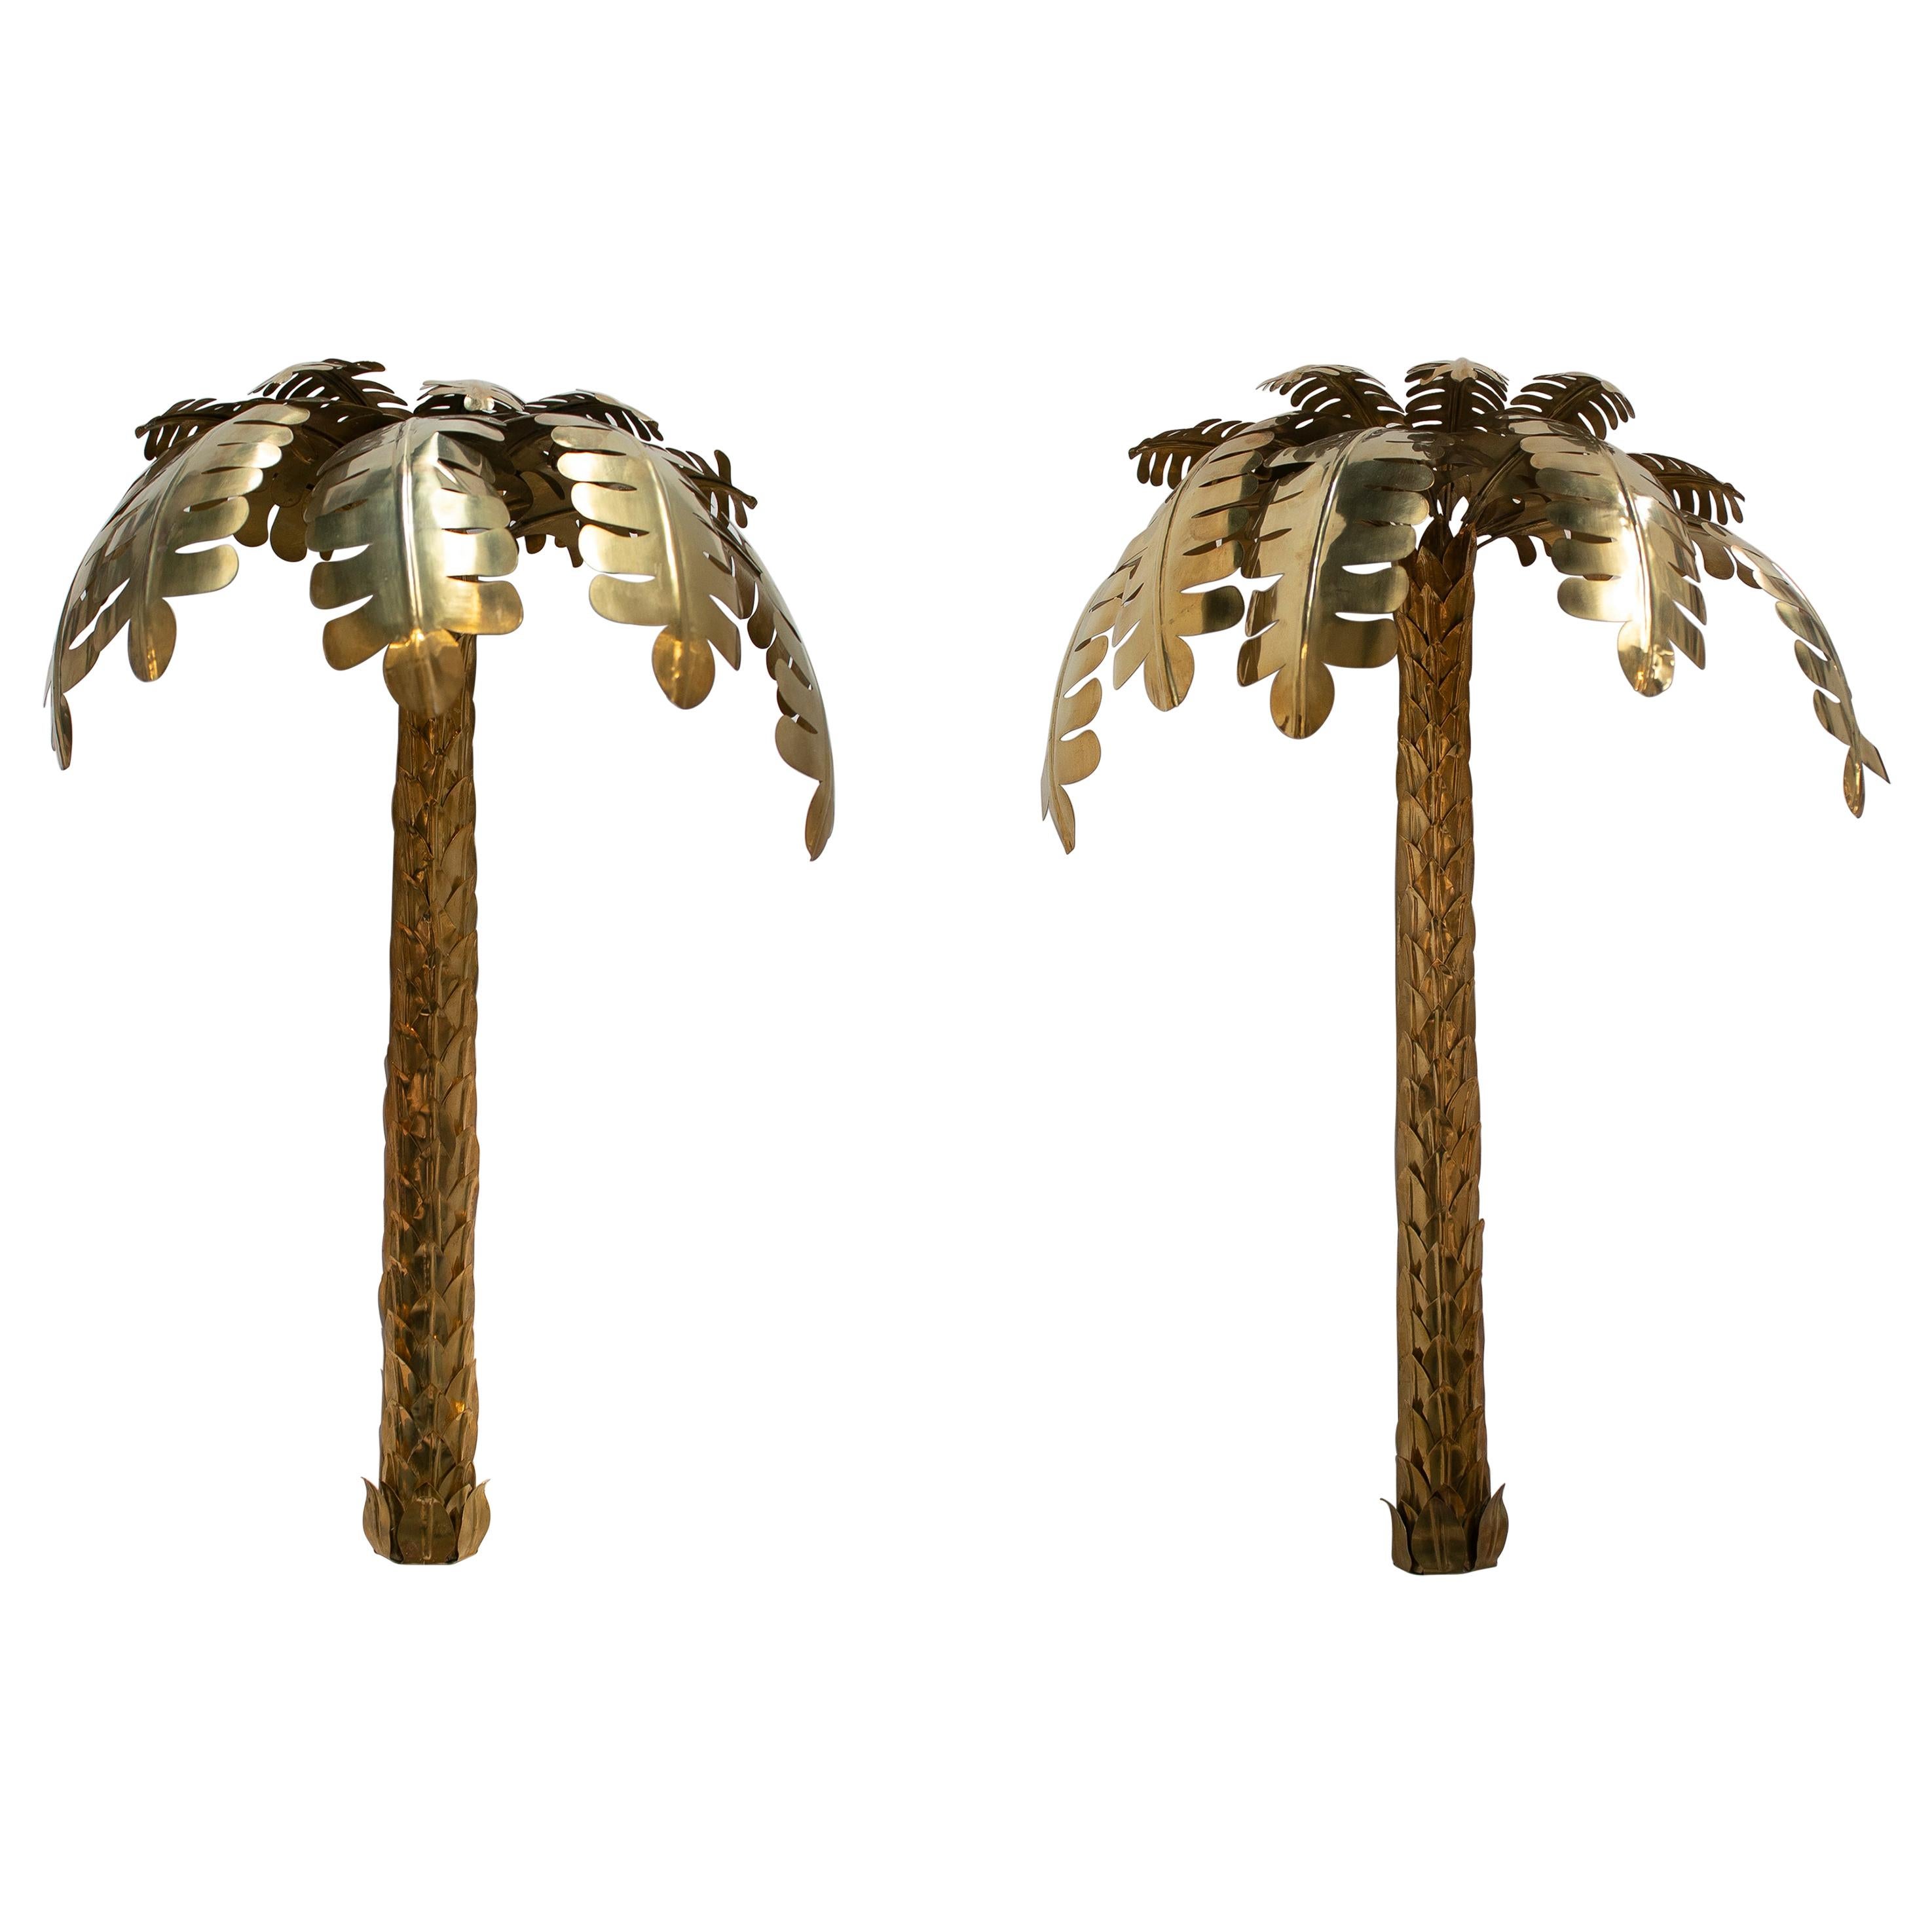 Pair of Modern French Bronze Palm Shaped Wall Lamp Shades or Ornaments